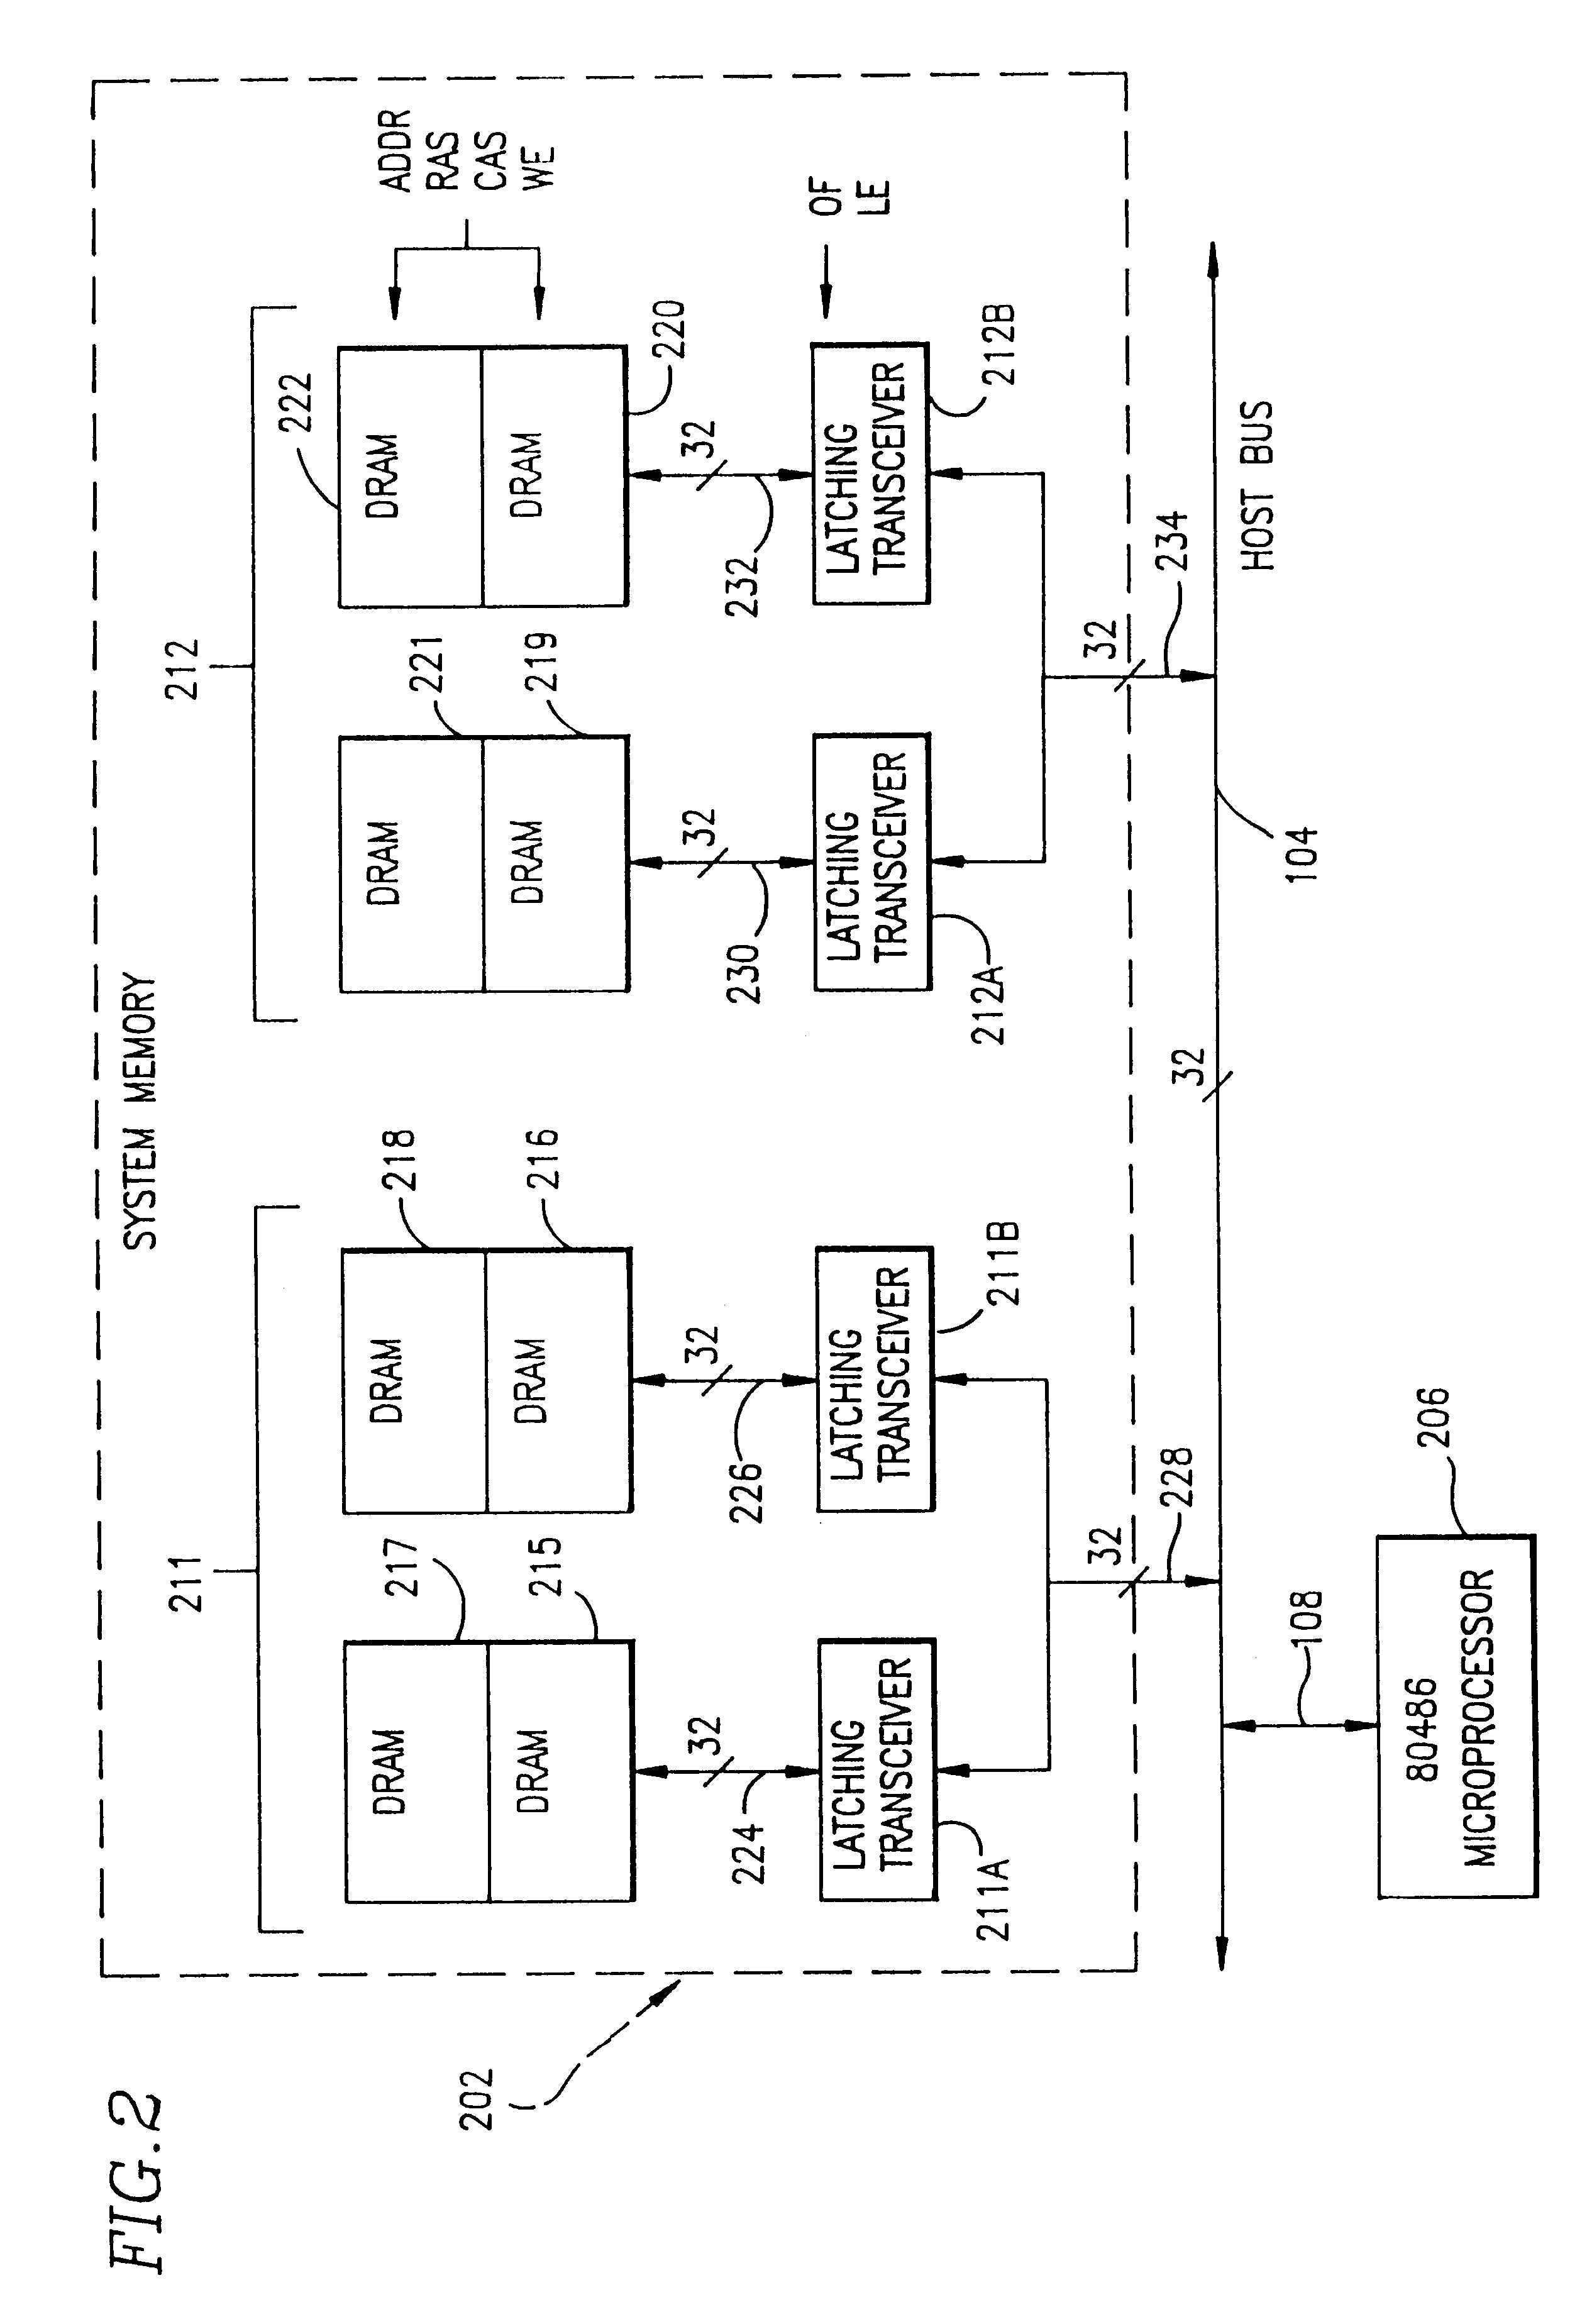 System and method for accessing data between a host bus and a system memory bus where the system memory bus has a data path that is twice the width of the data path for the host bus